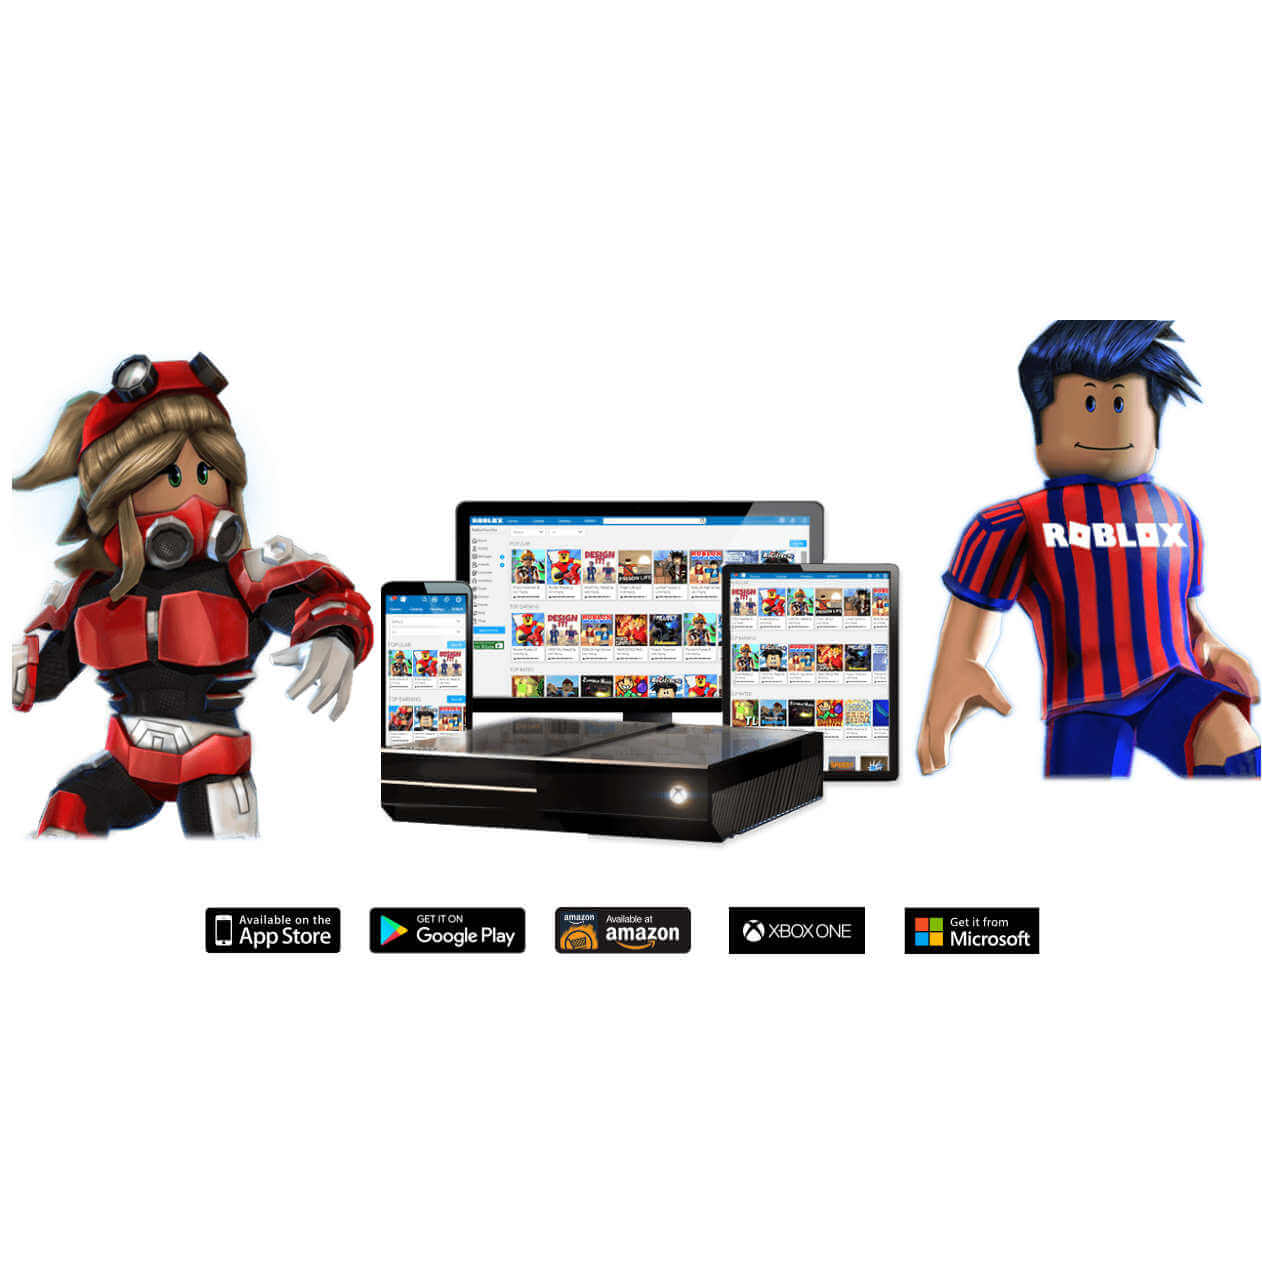 Download Roblox On The App Store